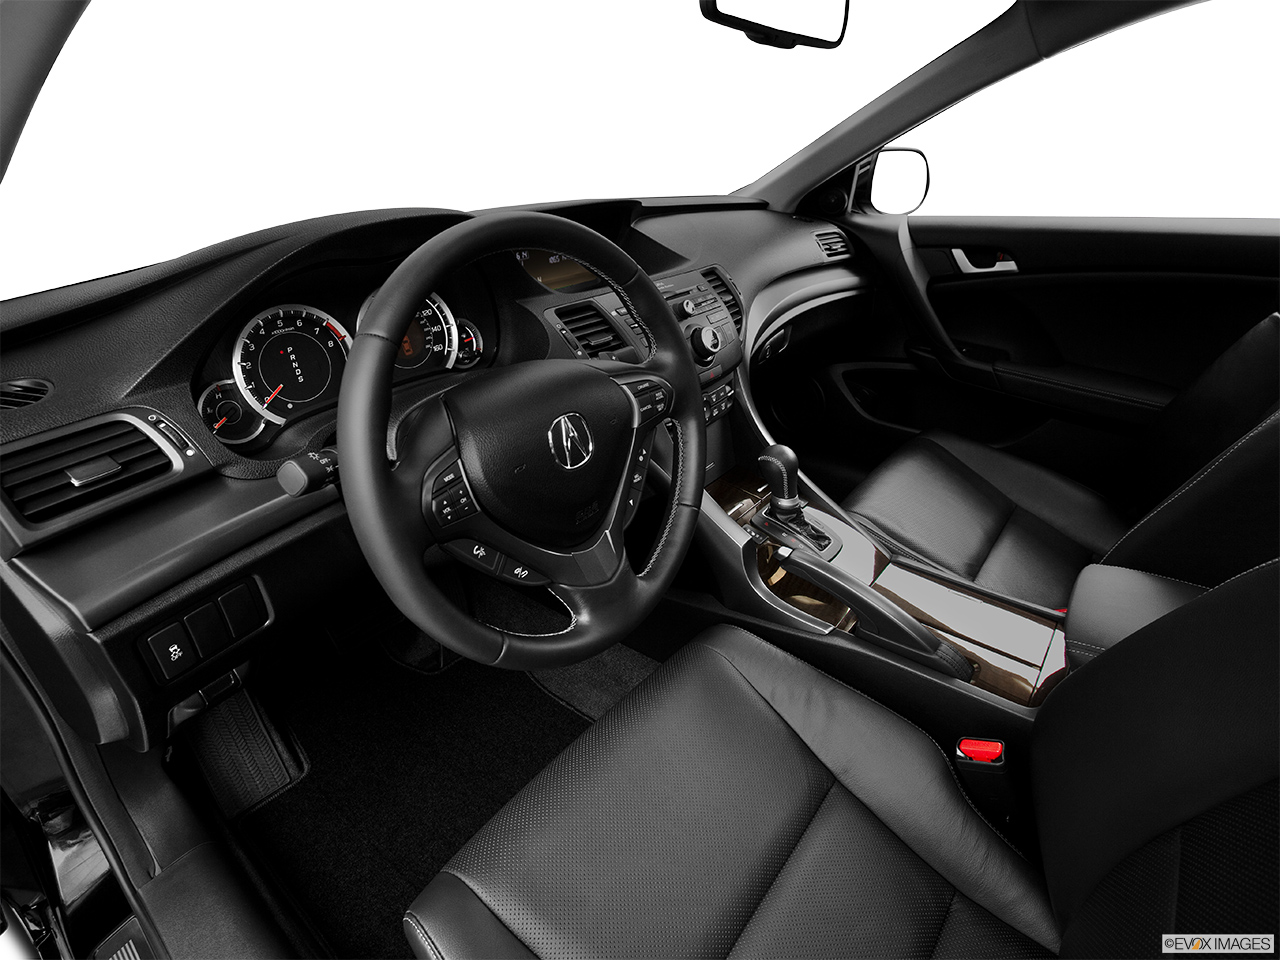 2014 Acura TSX 5-speed Automatic Interior Hero (driver's side). 